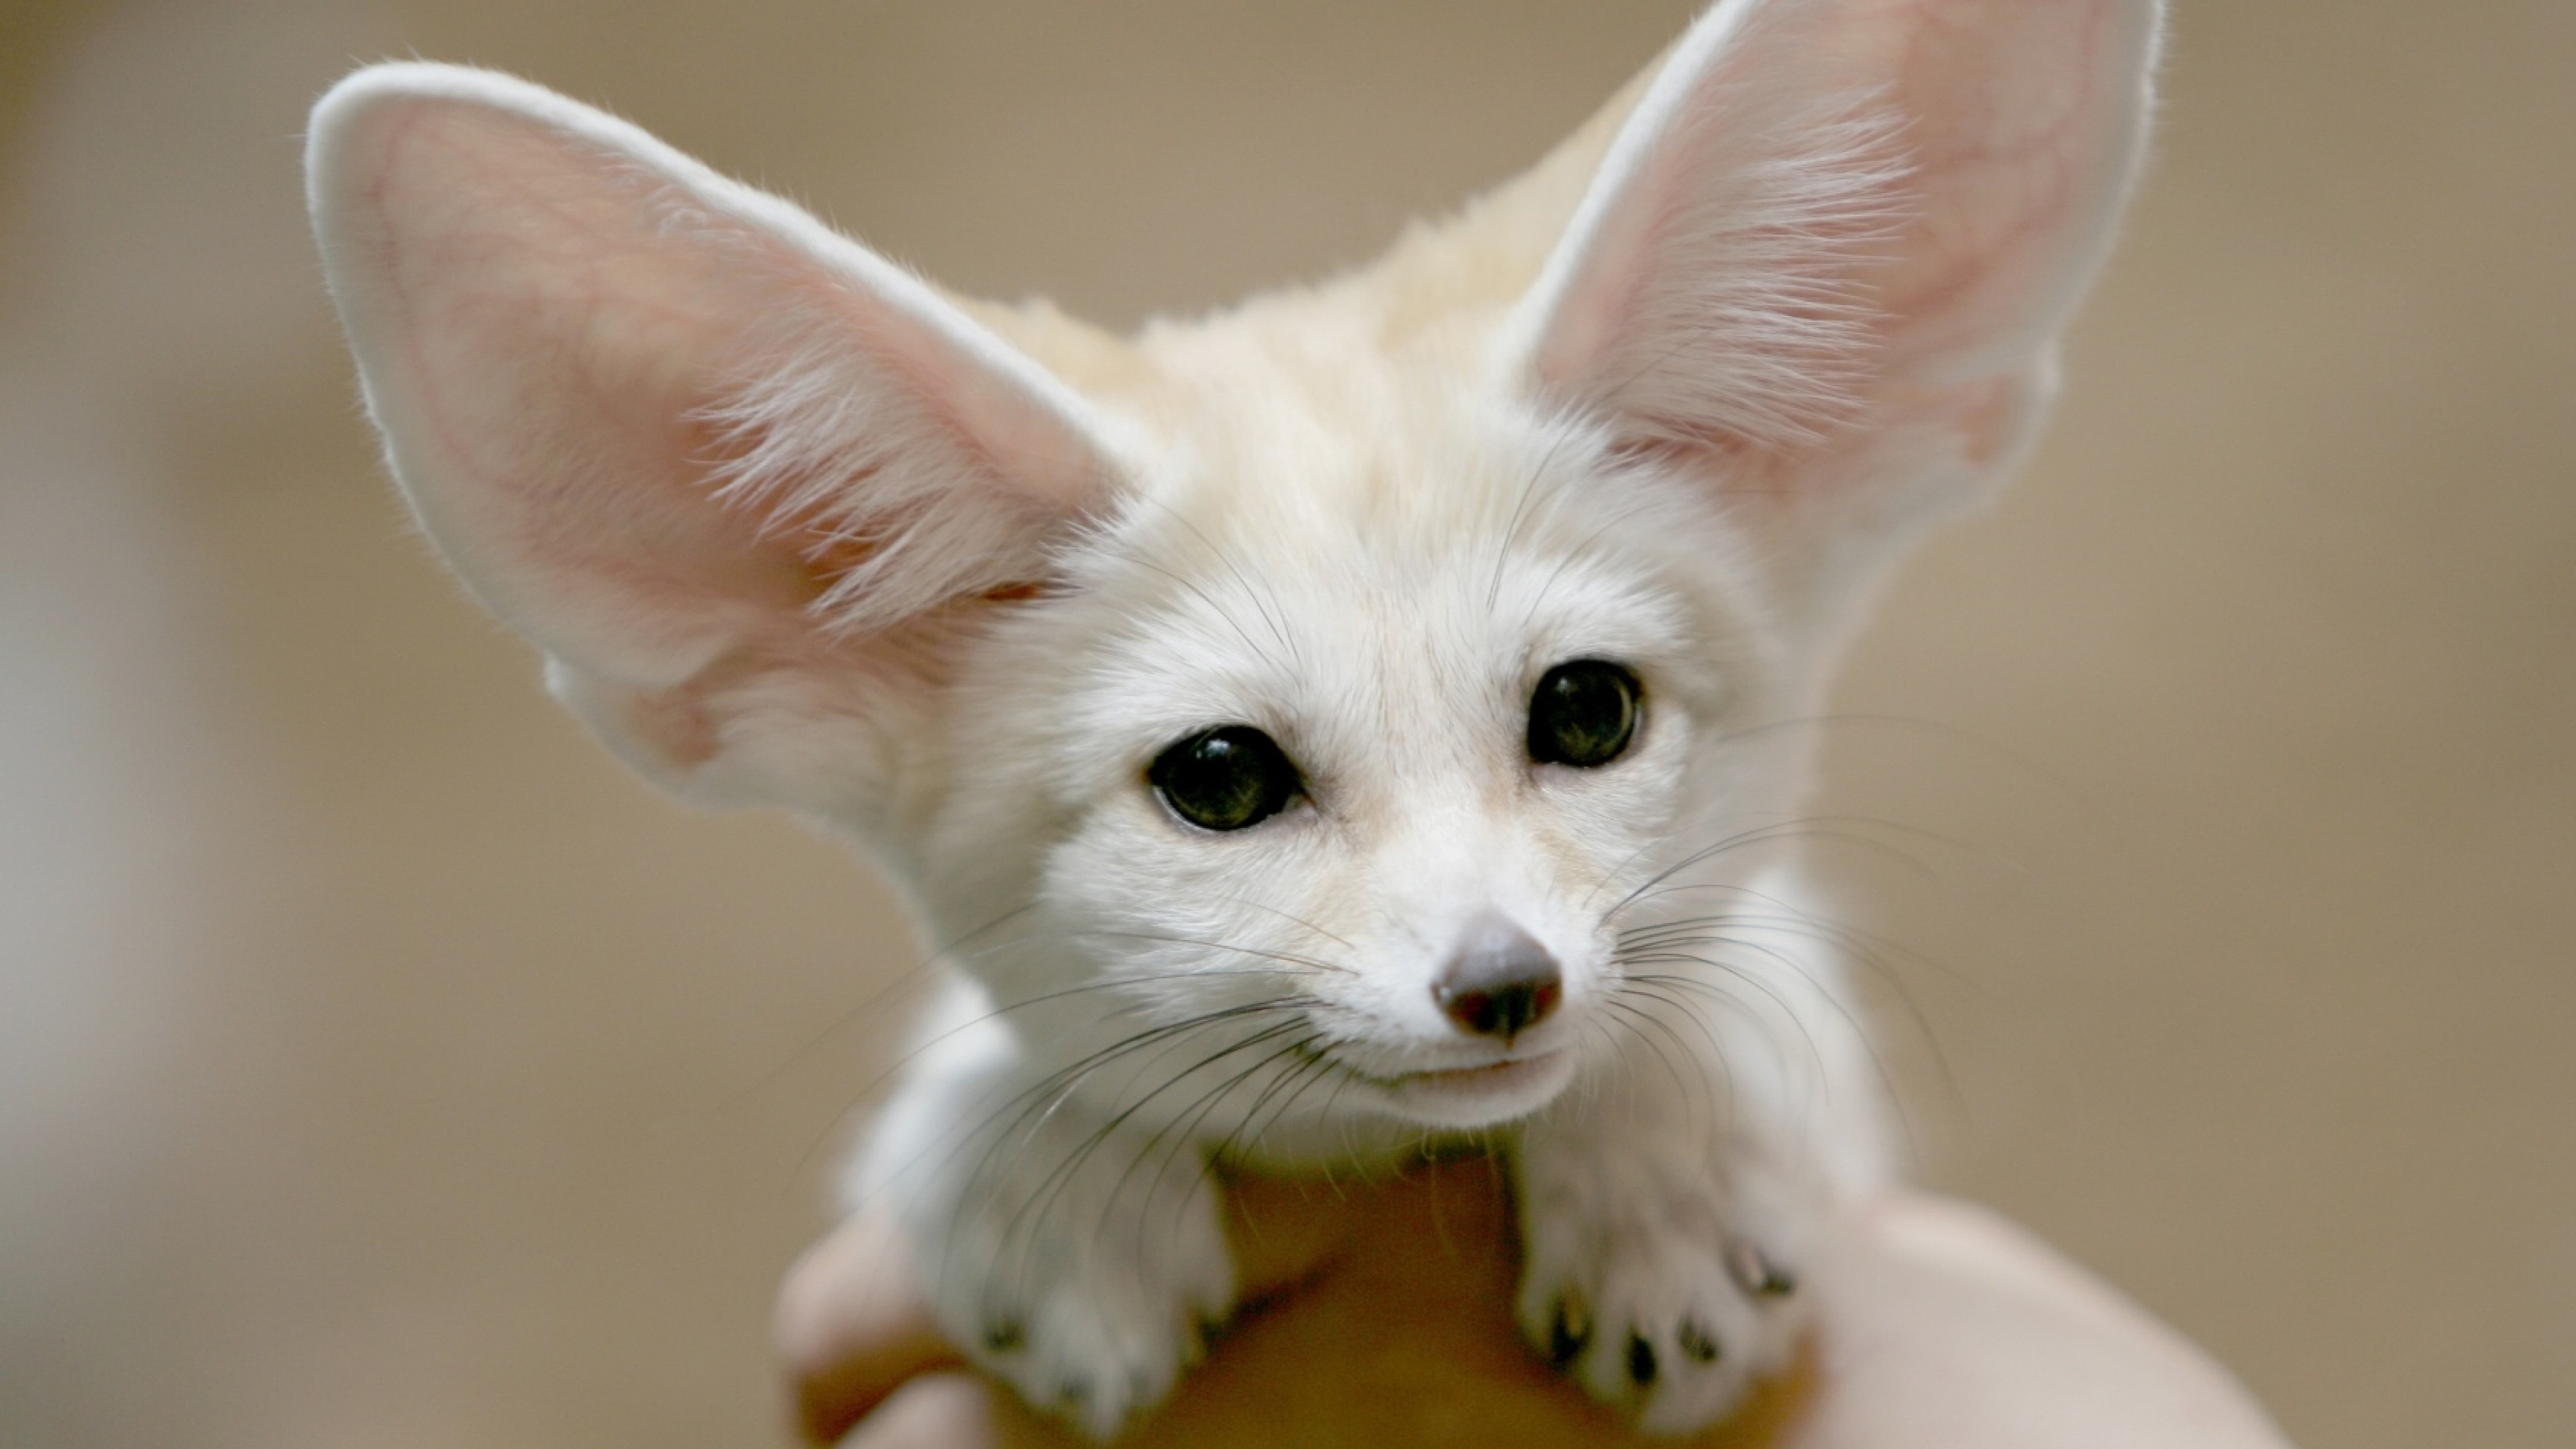 Fennec Fox, Cute big ears wallpapers, High-resolution images, Stunning fox pictures, 3840x2160 4K Desktop